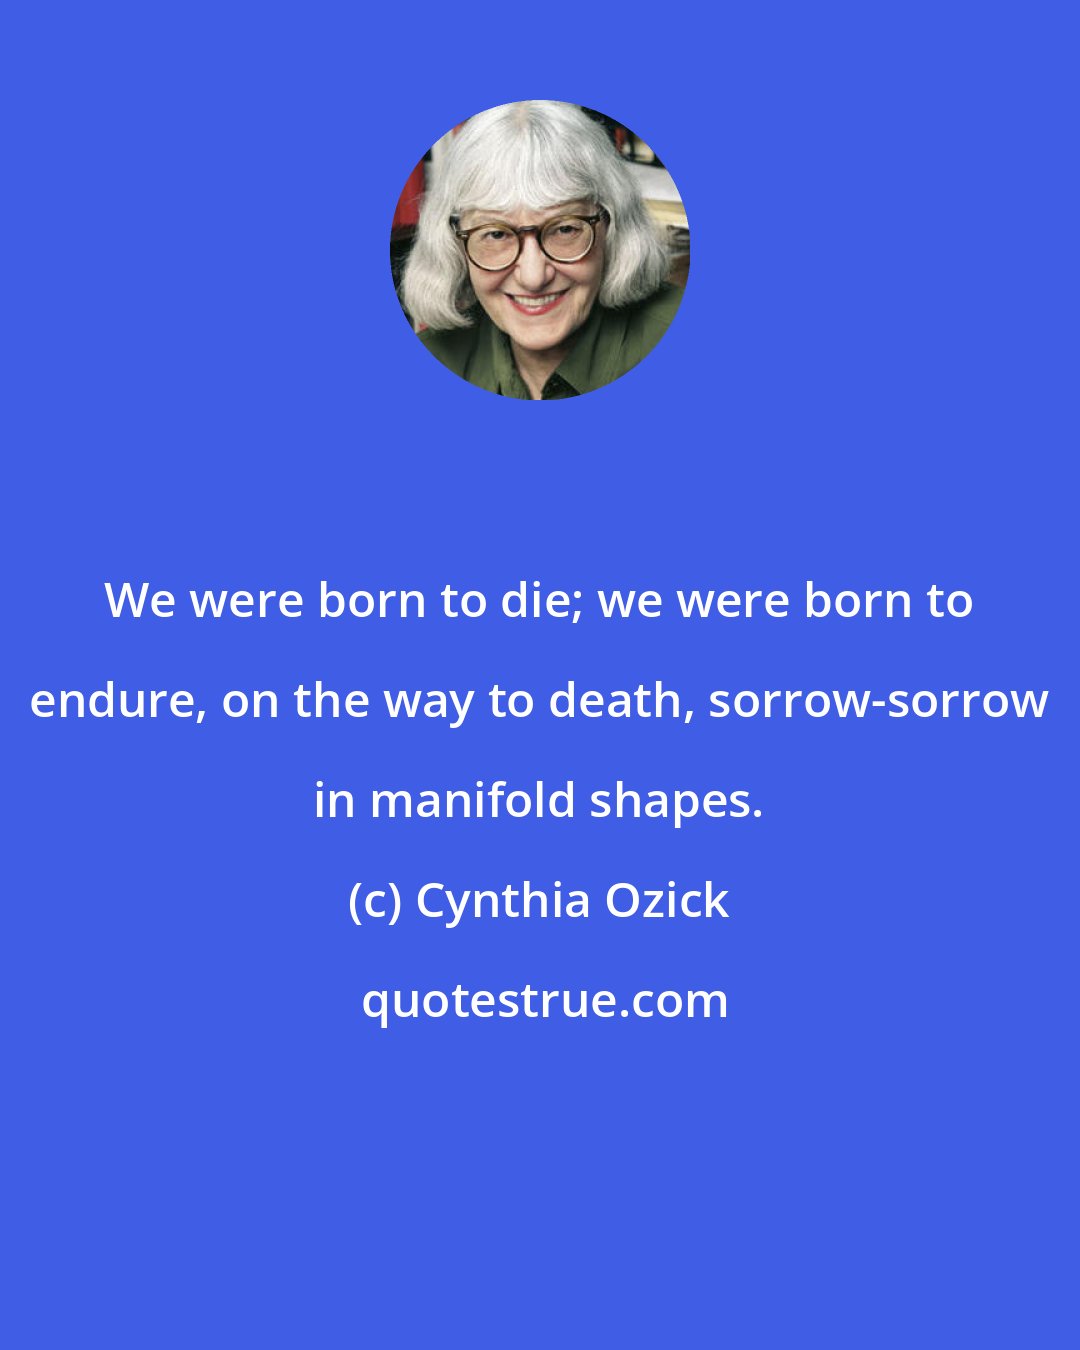 Cynthia Ozick: We were born to die; we were born to endure, on the way to death, sorrow-sorrow in manifold shapes.